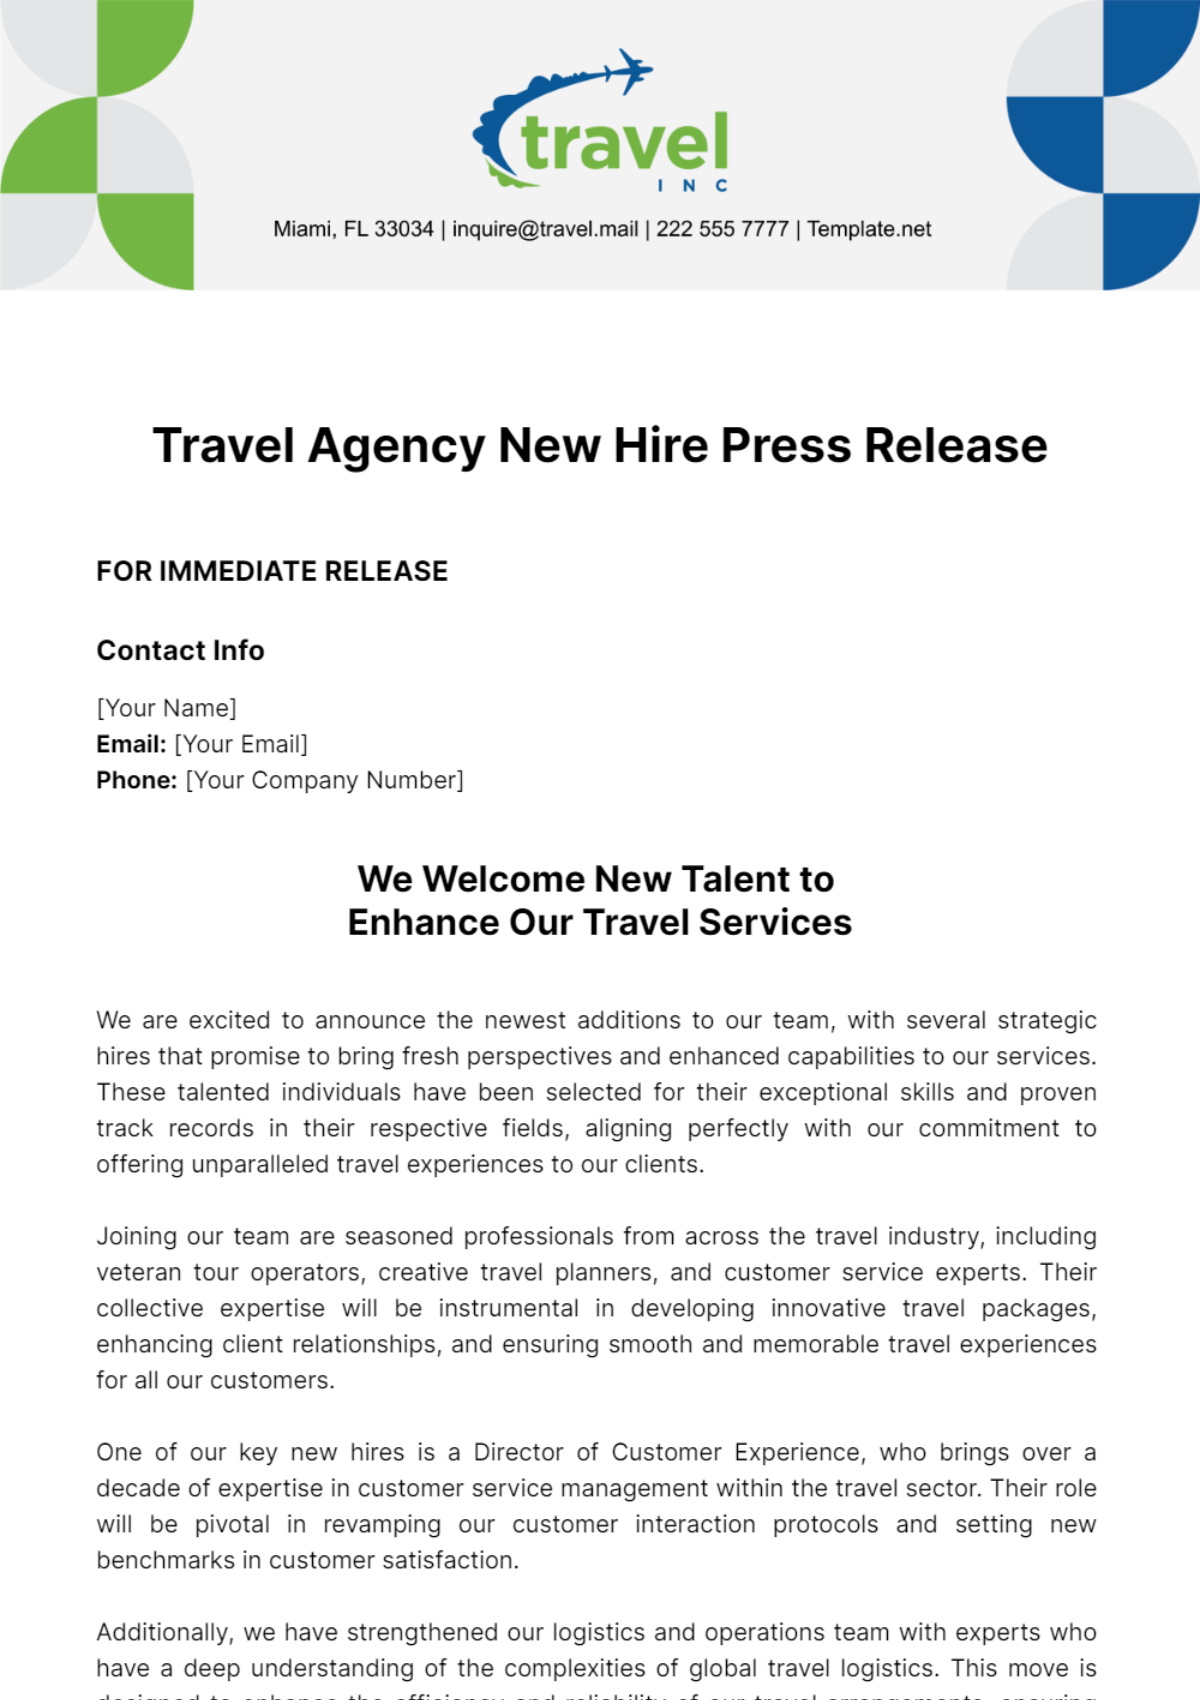 Travel Agency New Hire Press Release Template